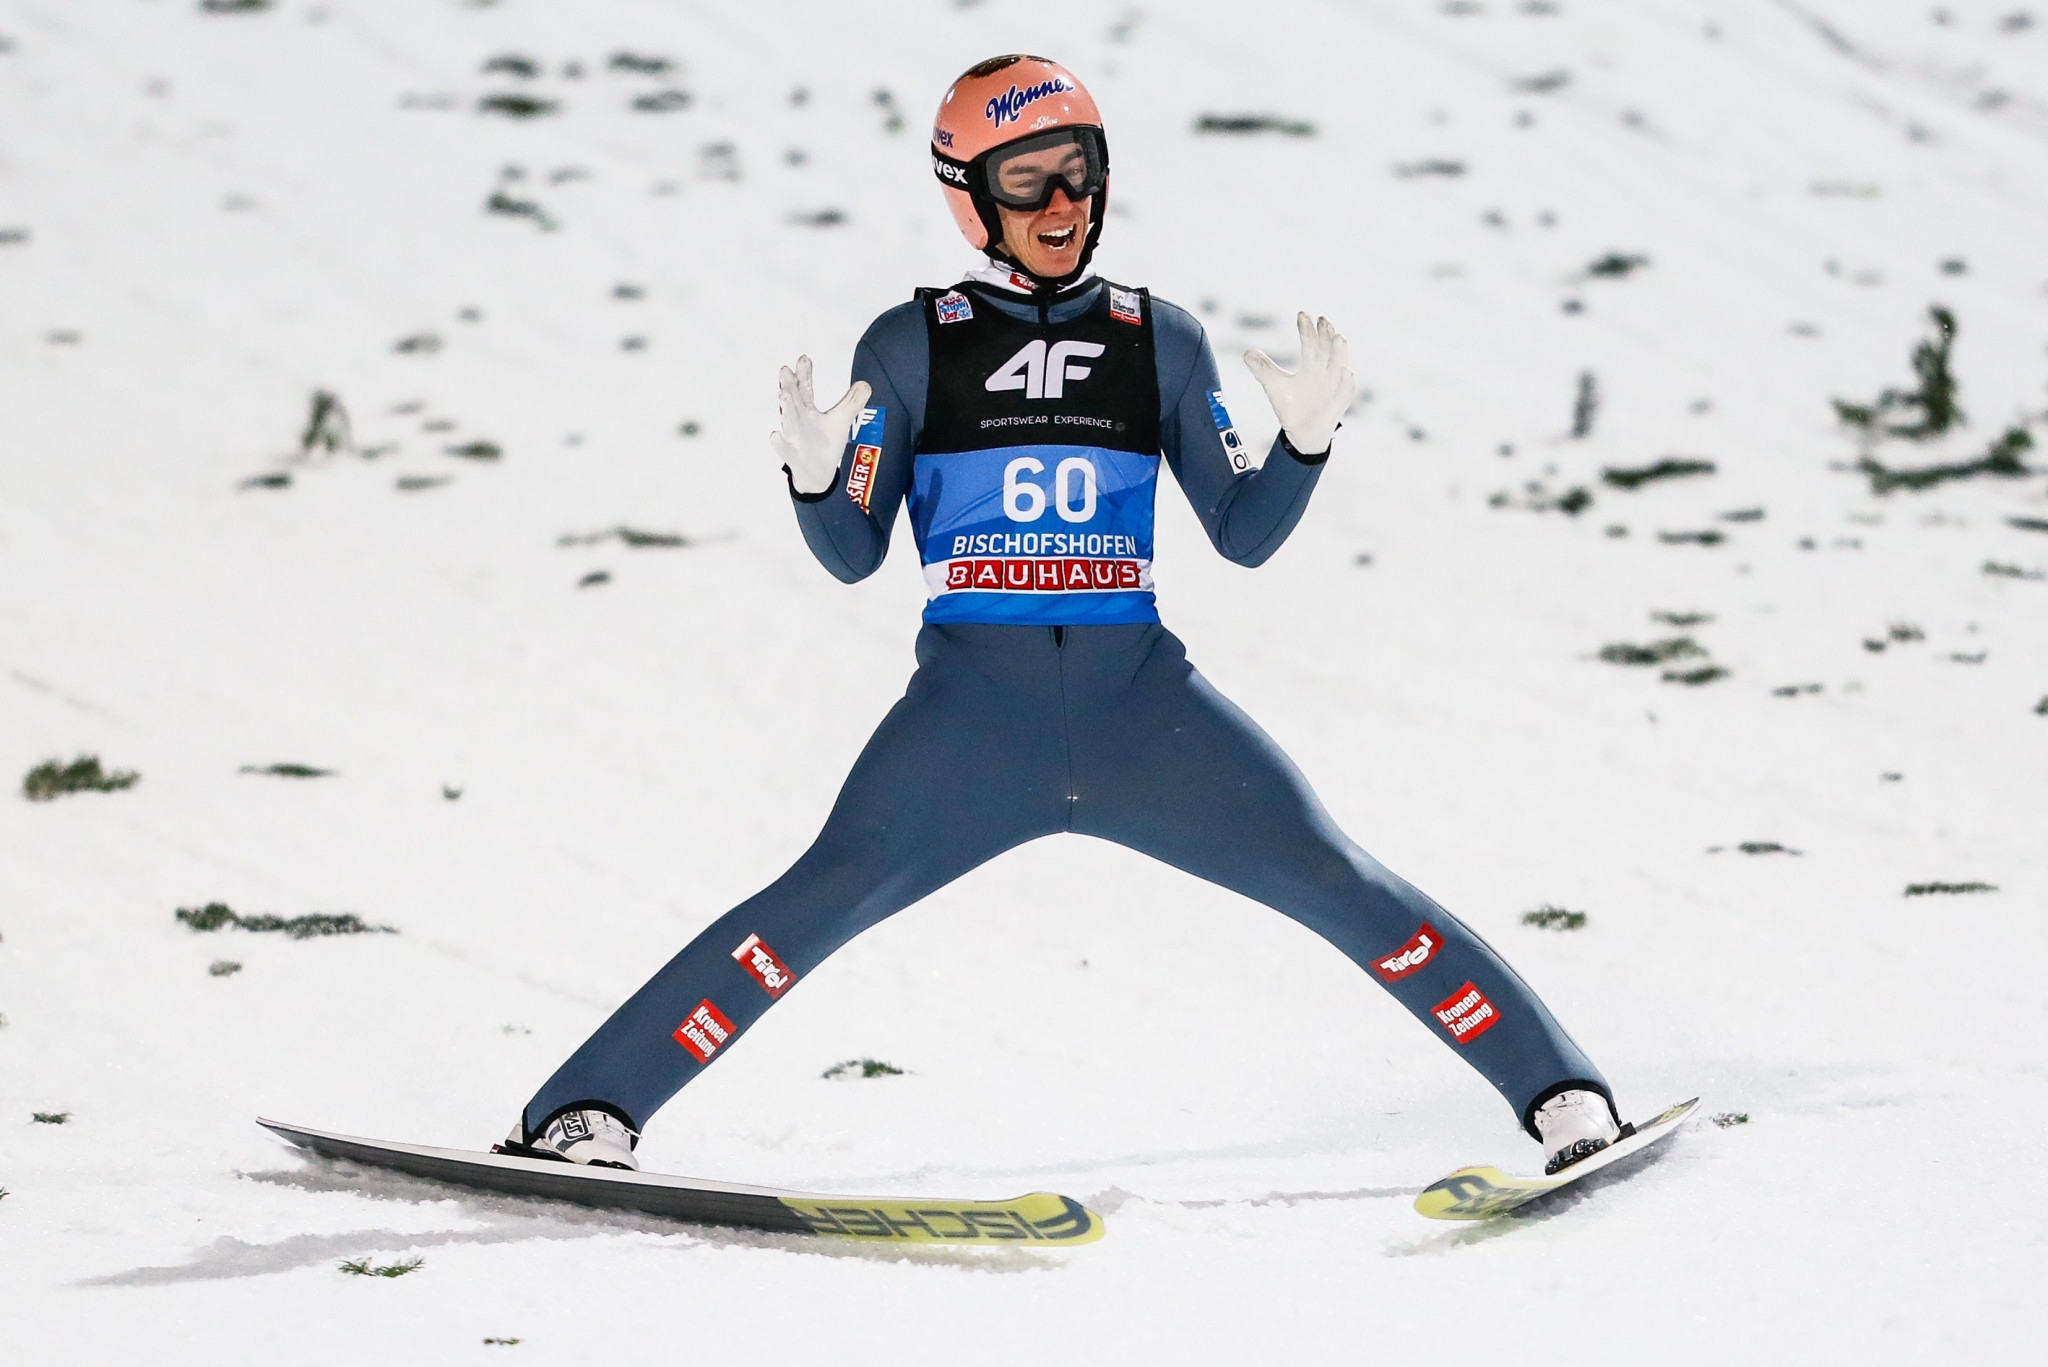 Kraft continues strong form to top qualifying at FIS Men's Ski Jumping World Cup in Sapporo